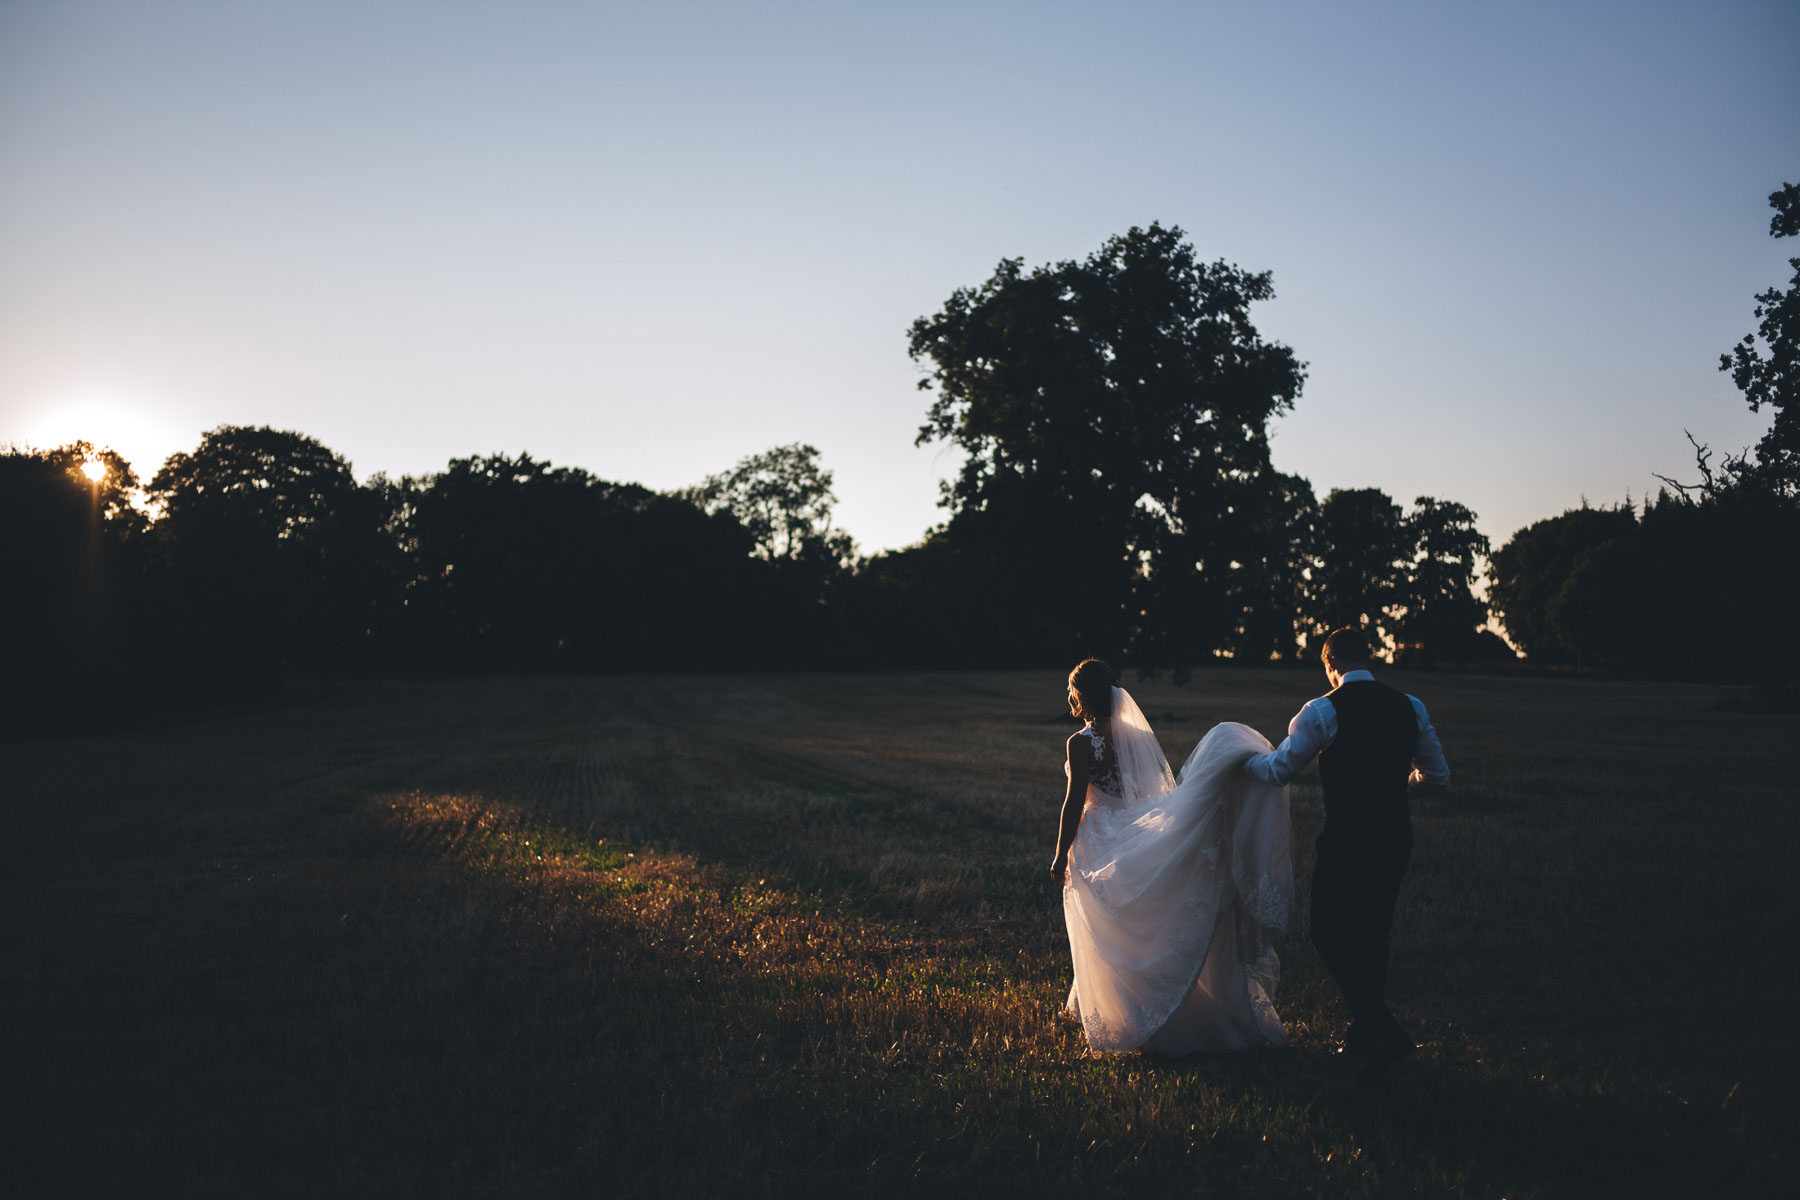 more lovely evening light for a wedding couple